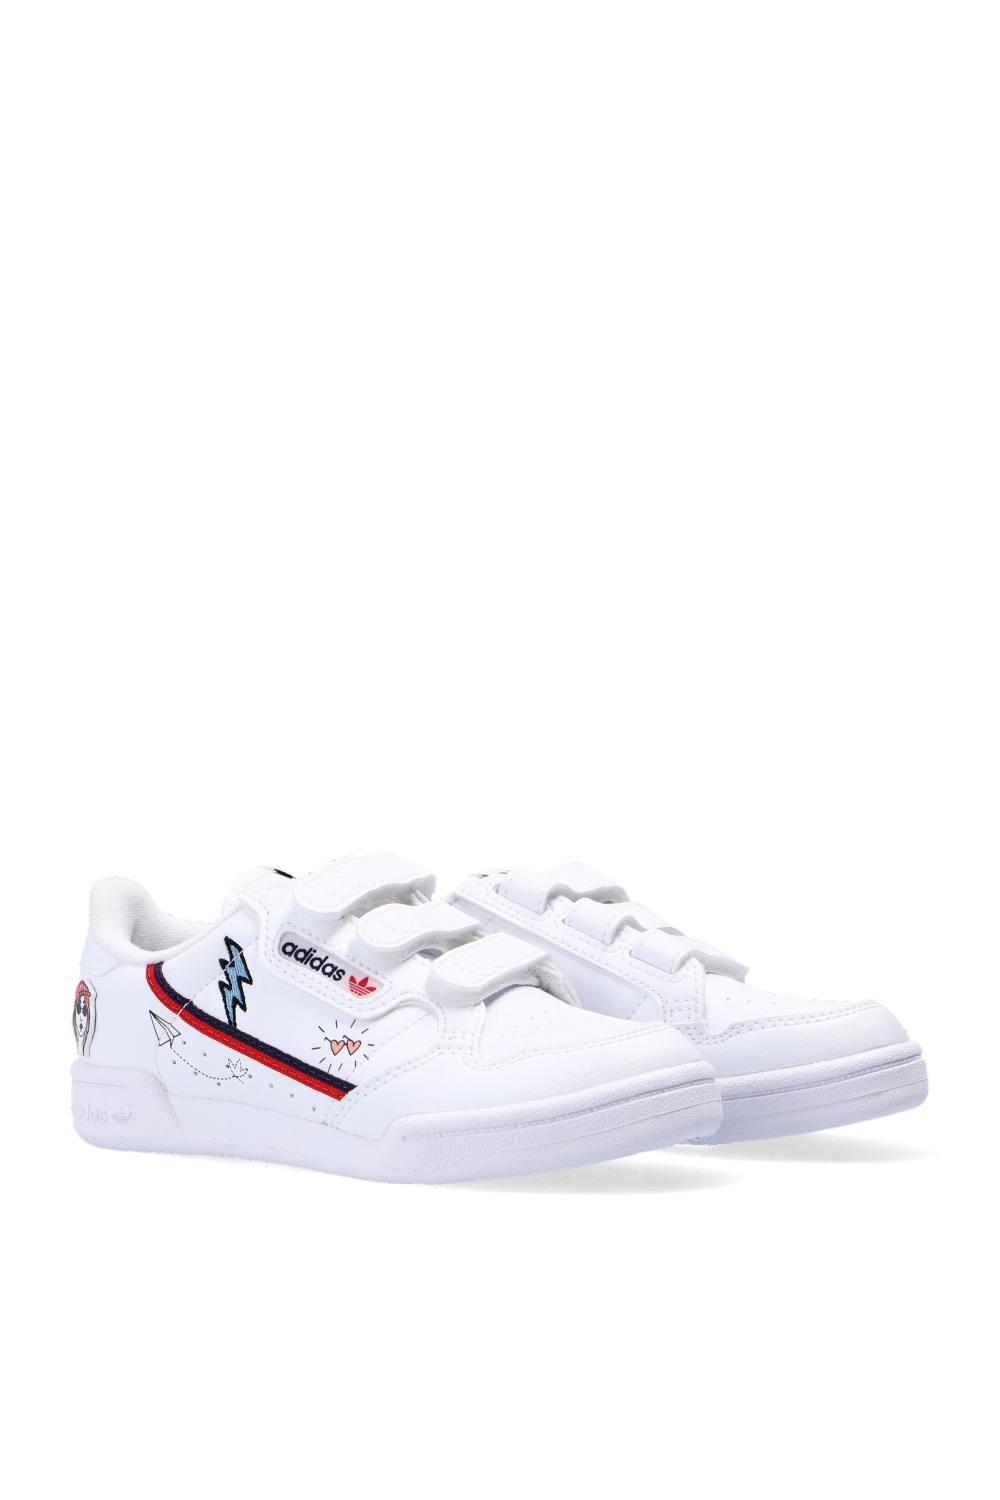 ADIDAS Kids ‘Continental 80’ sneakers